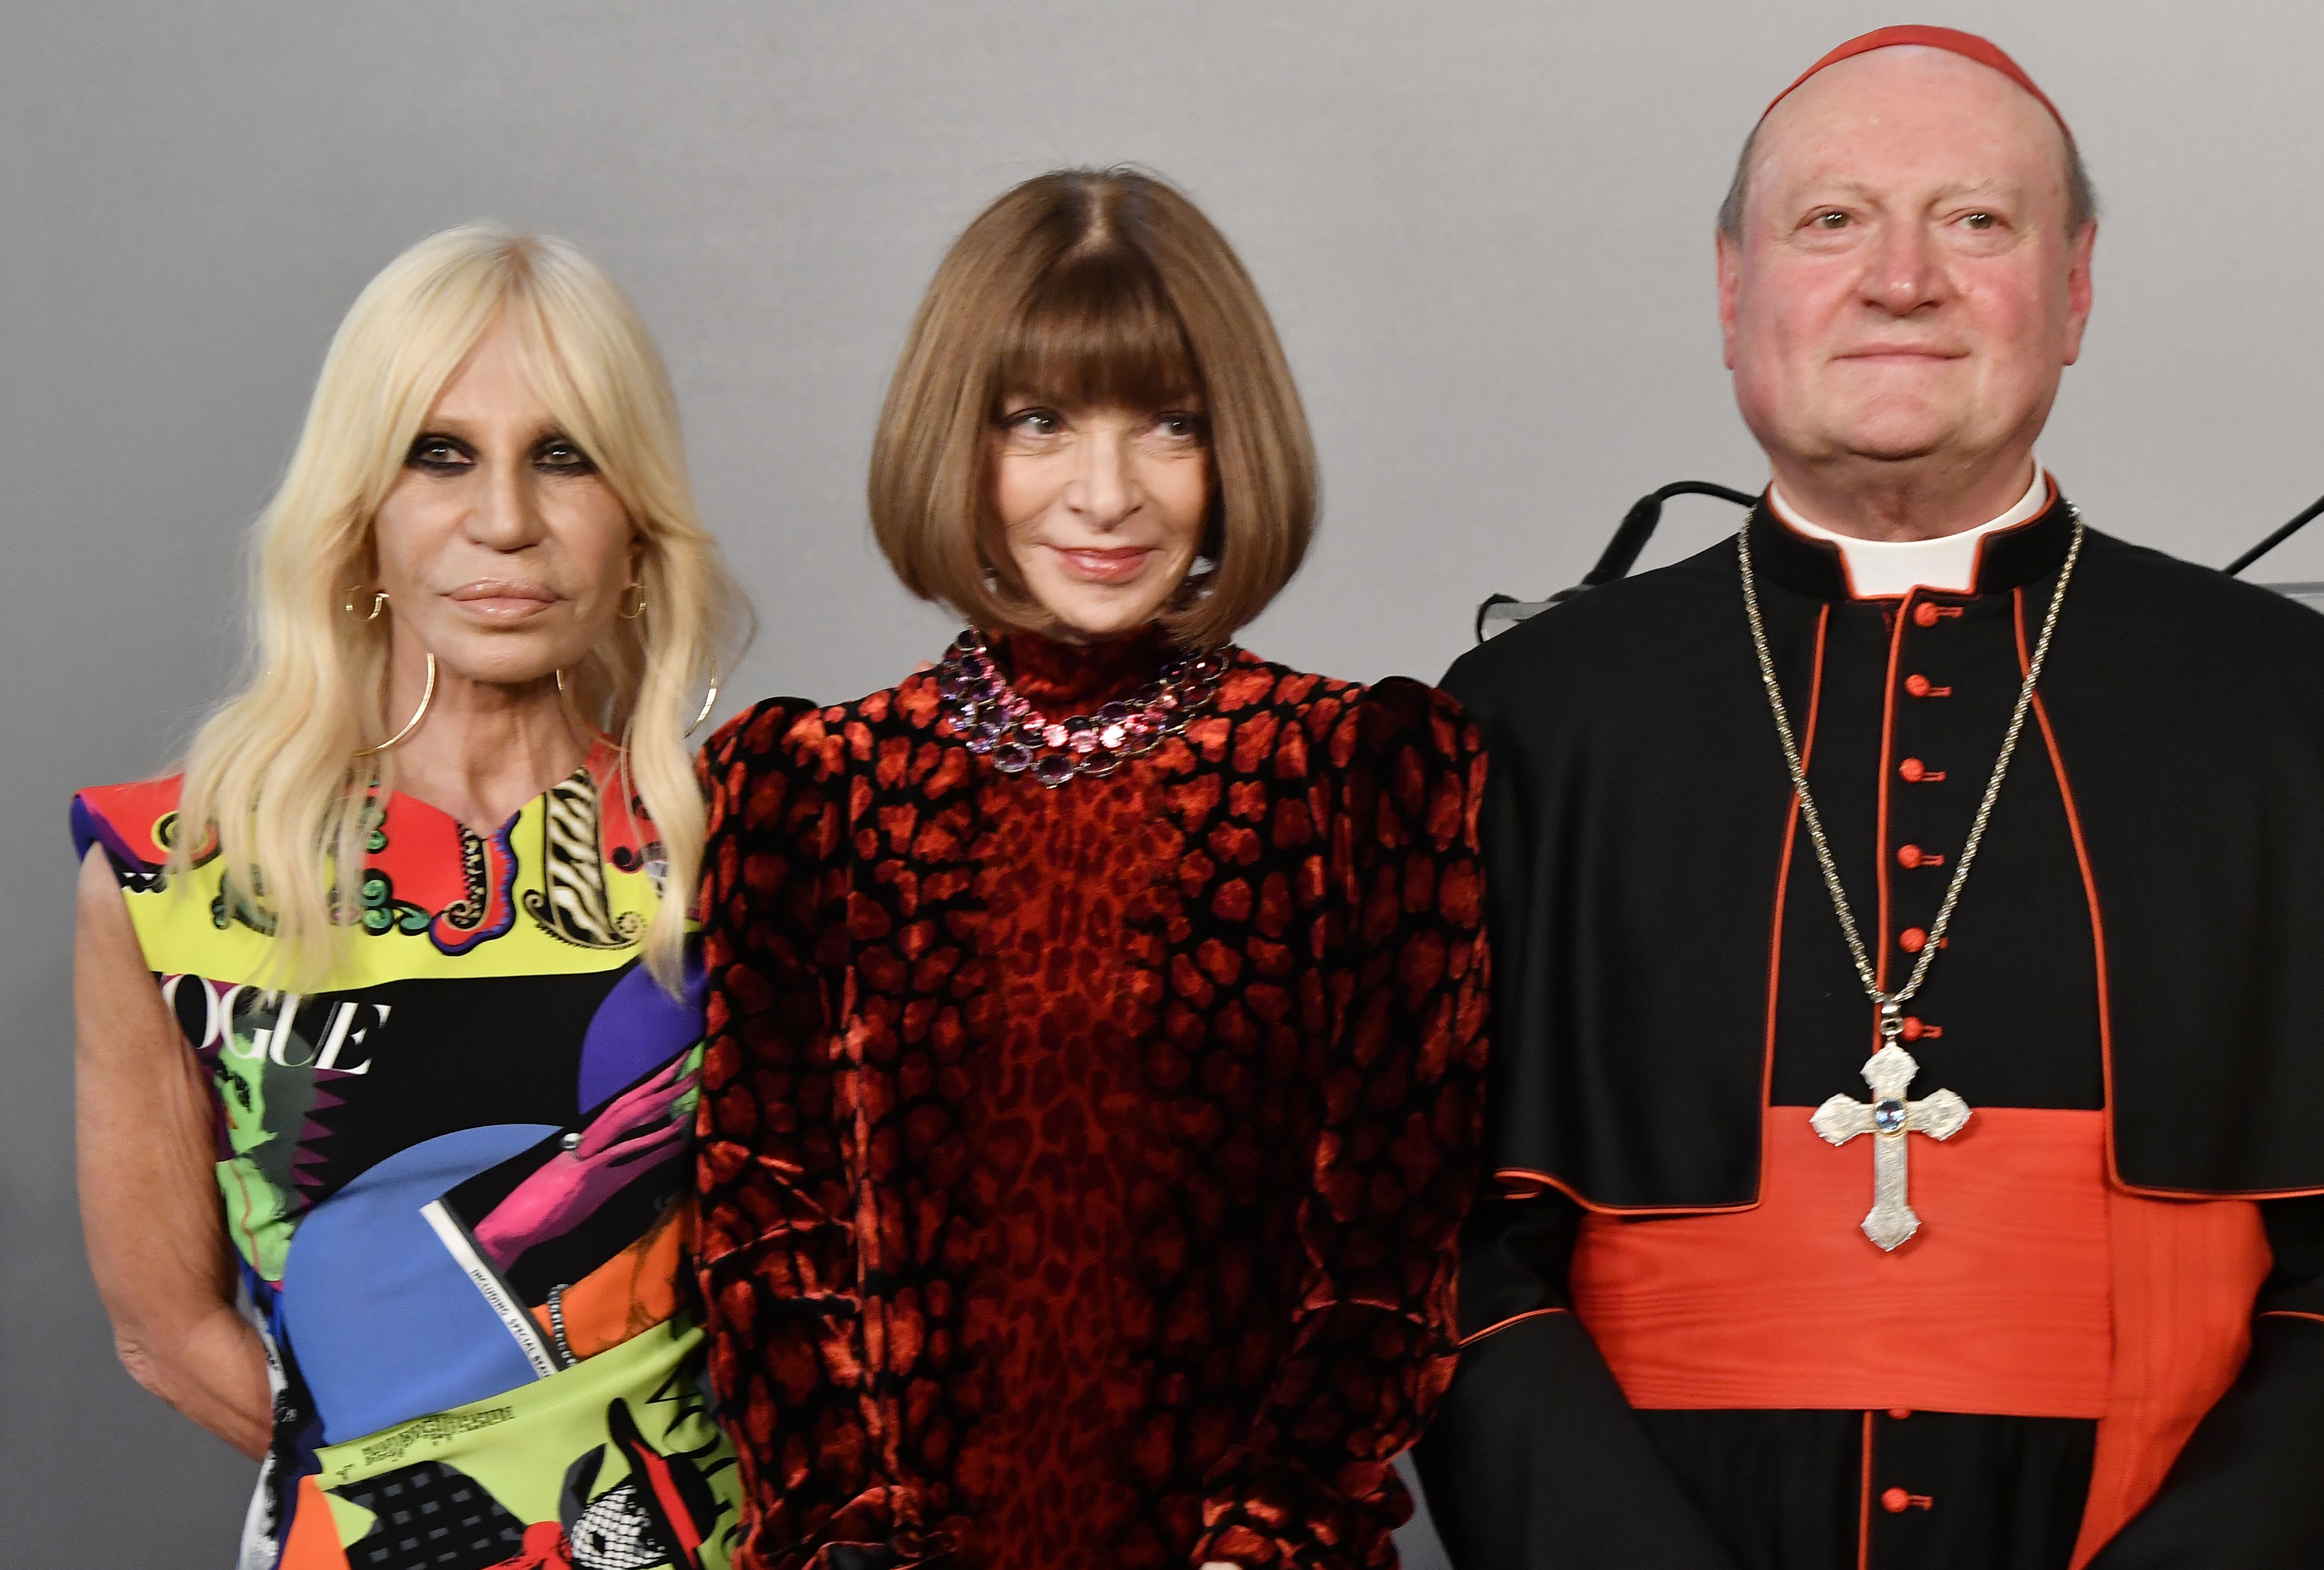 Italian designer Donatella Versace with editor-in-chief of Vogue Anna Wintour and cardinal Gianfranco Ravasi, President of the Vatican Pontifical Council for Culture, at Rome's Palazzo Colonna on Feb. 26, 2018. (Tiziana Fabi—AFP/Getty Images)